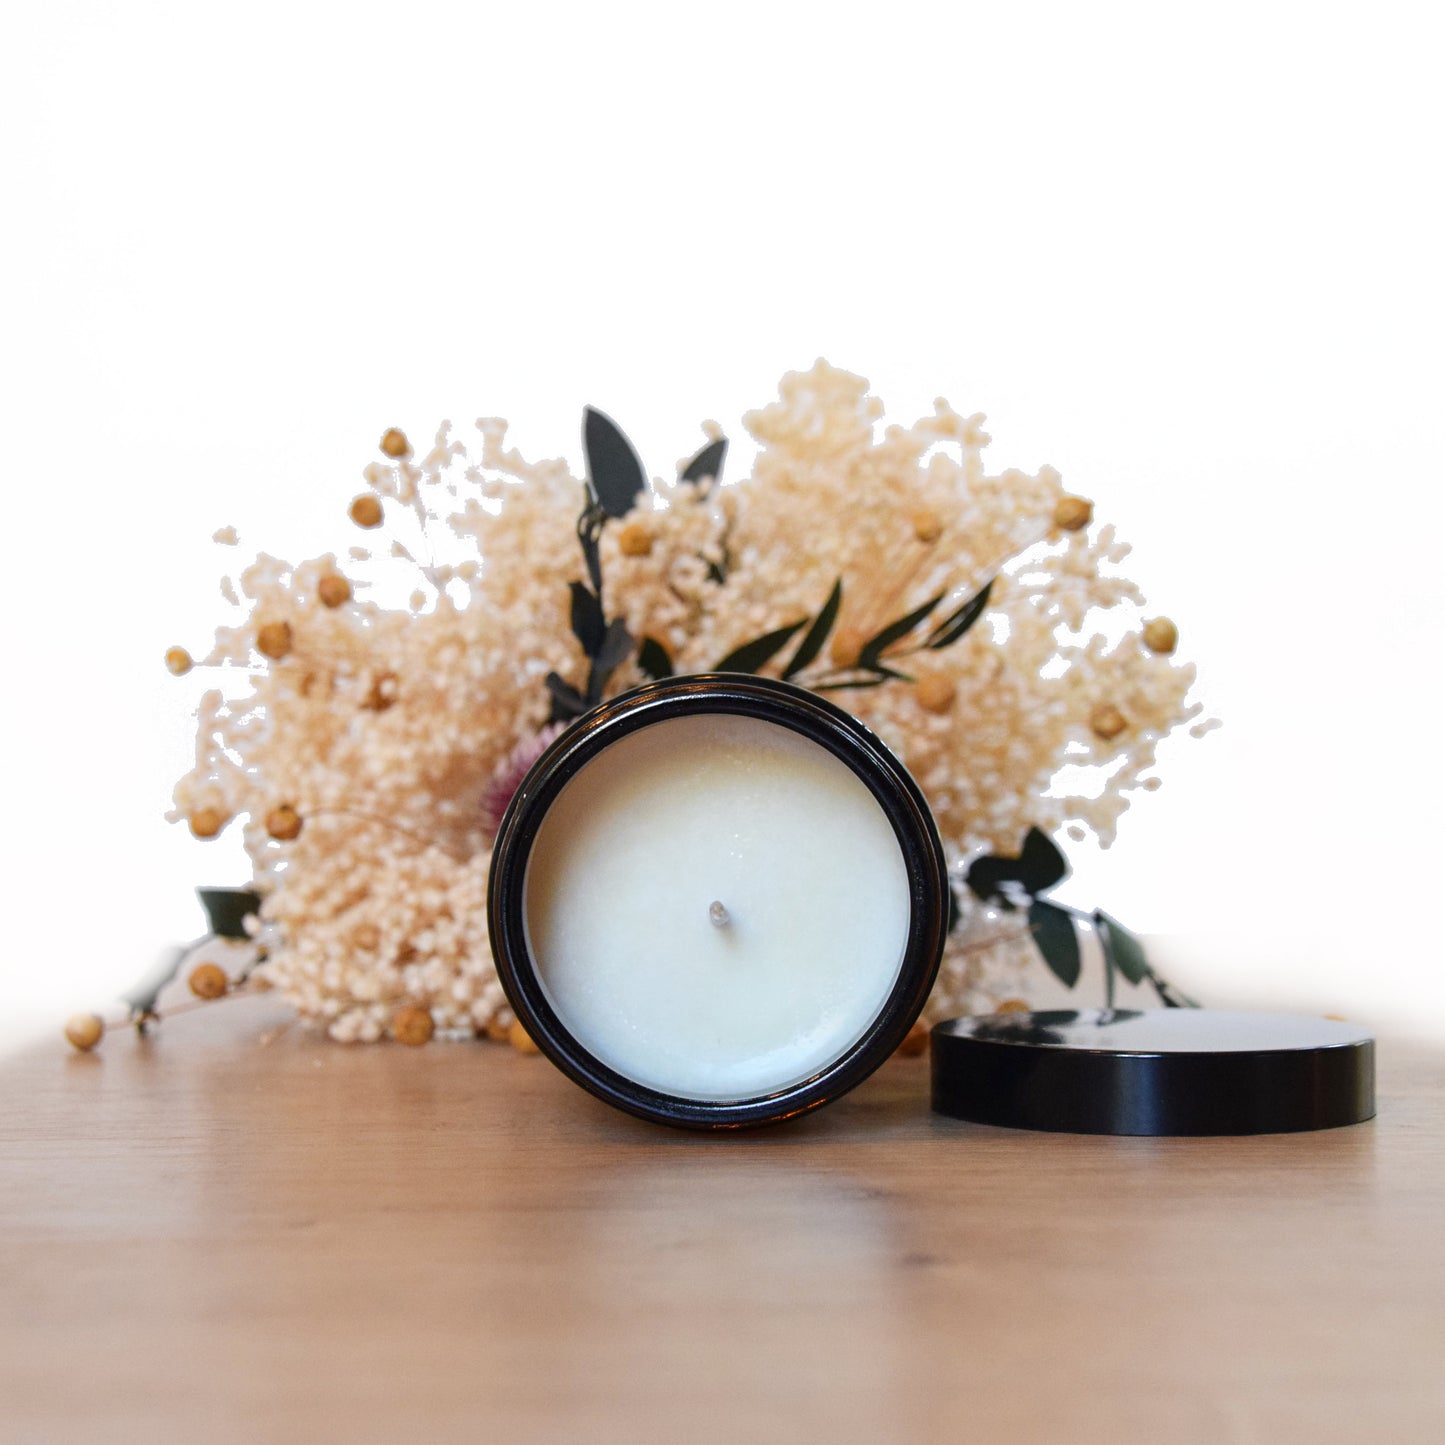 "Cotton flower" candle